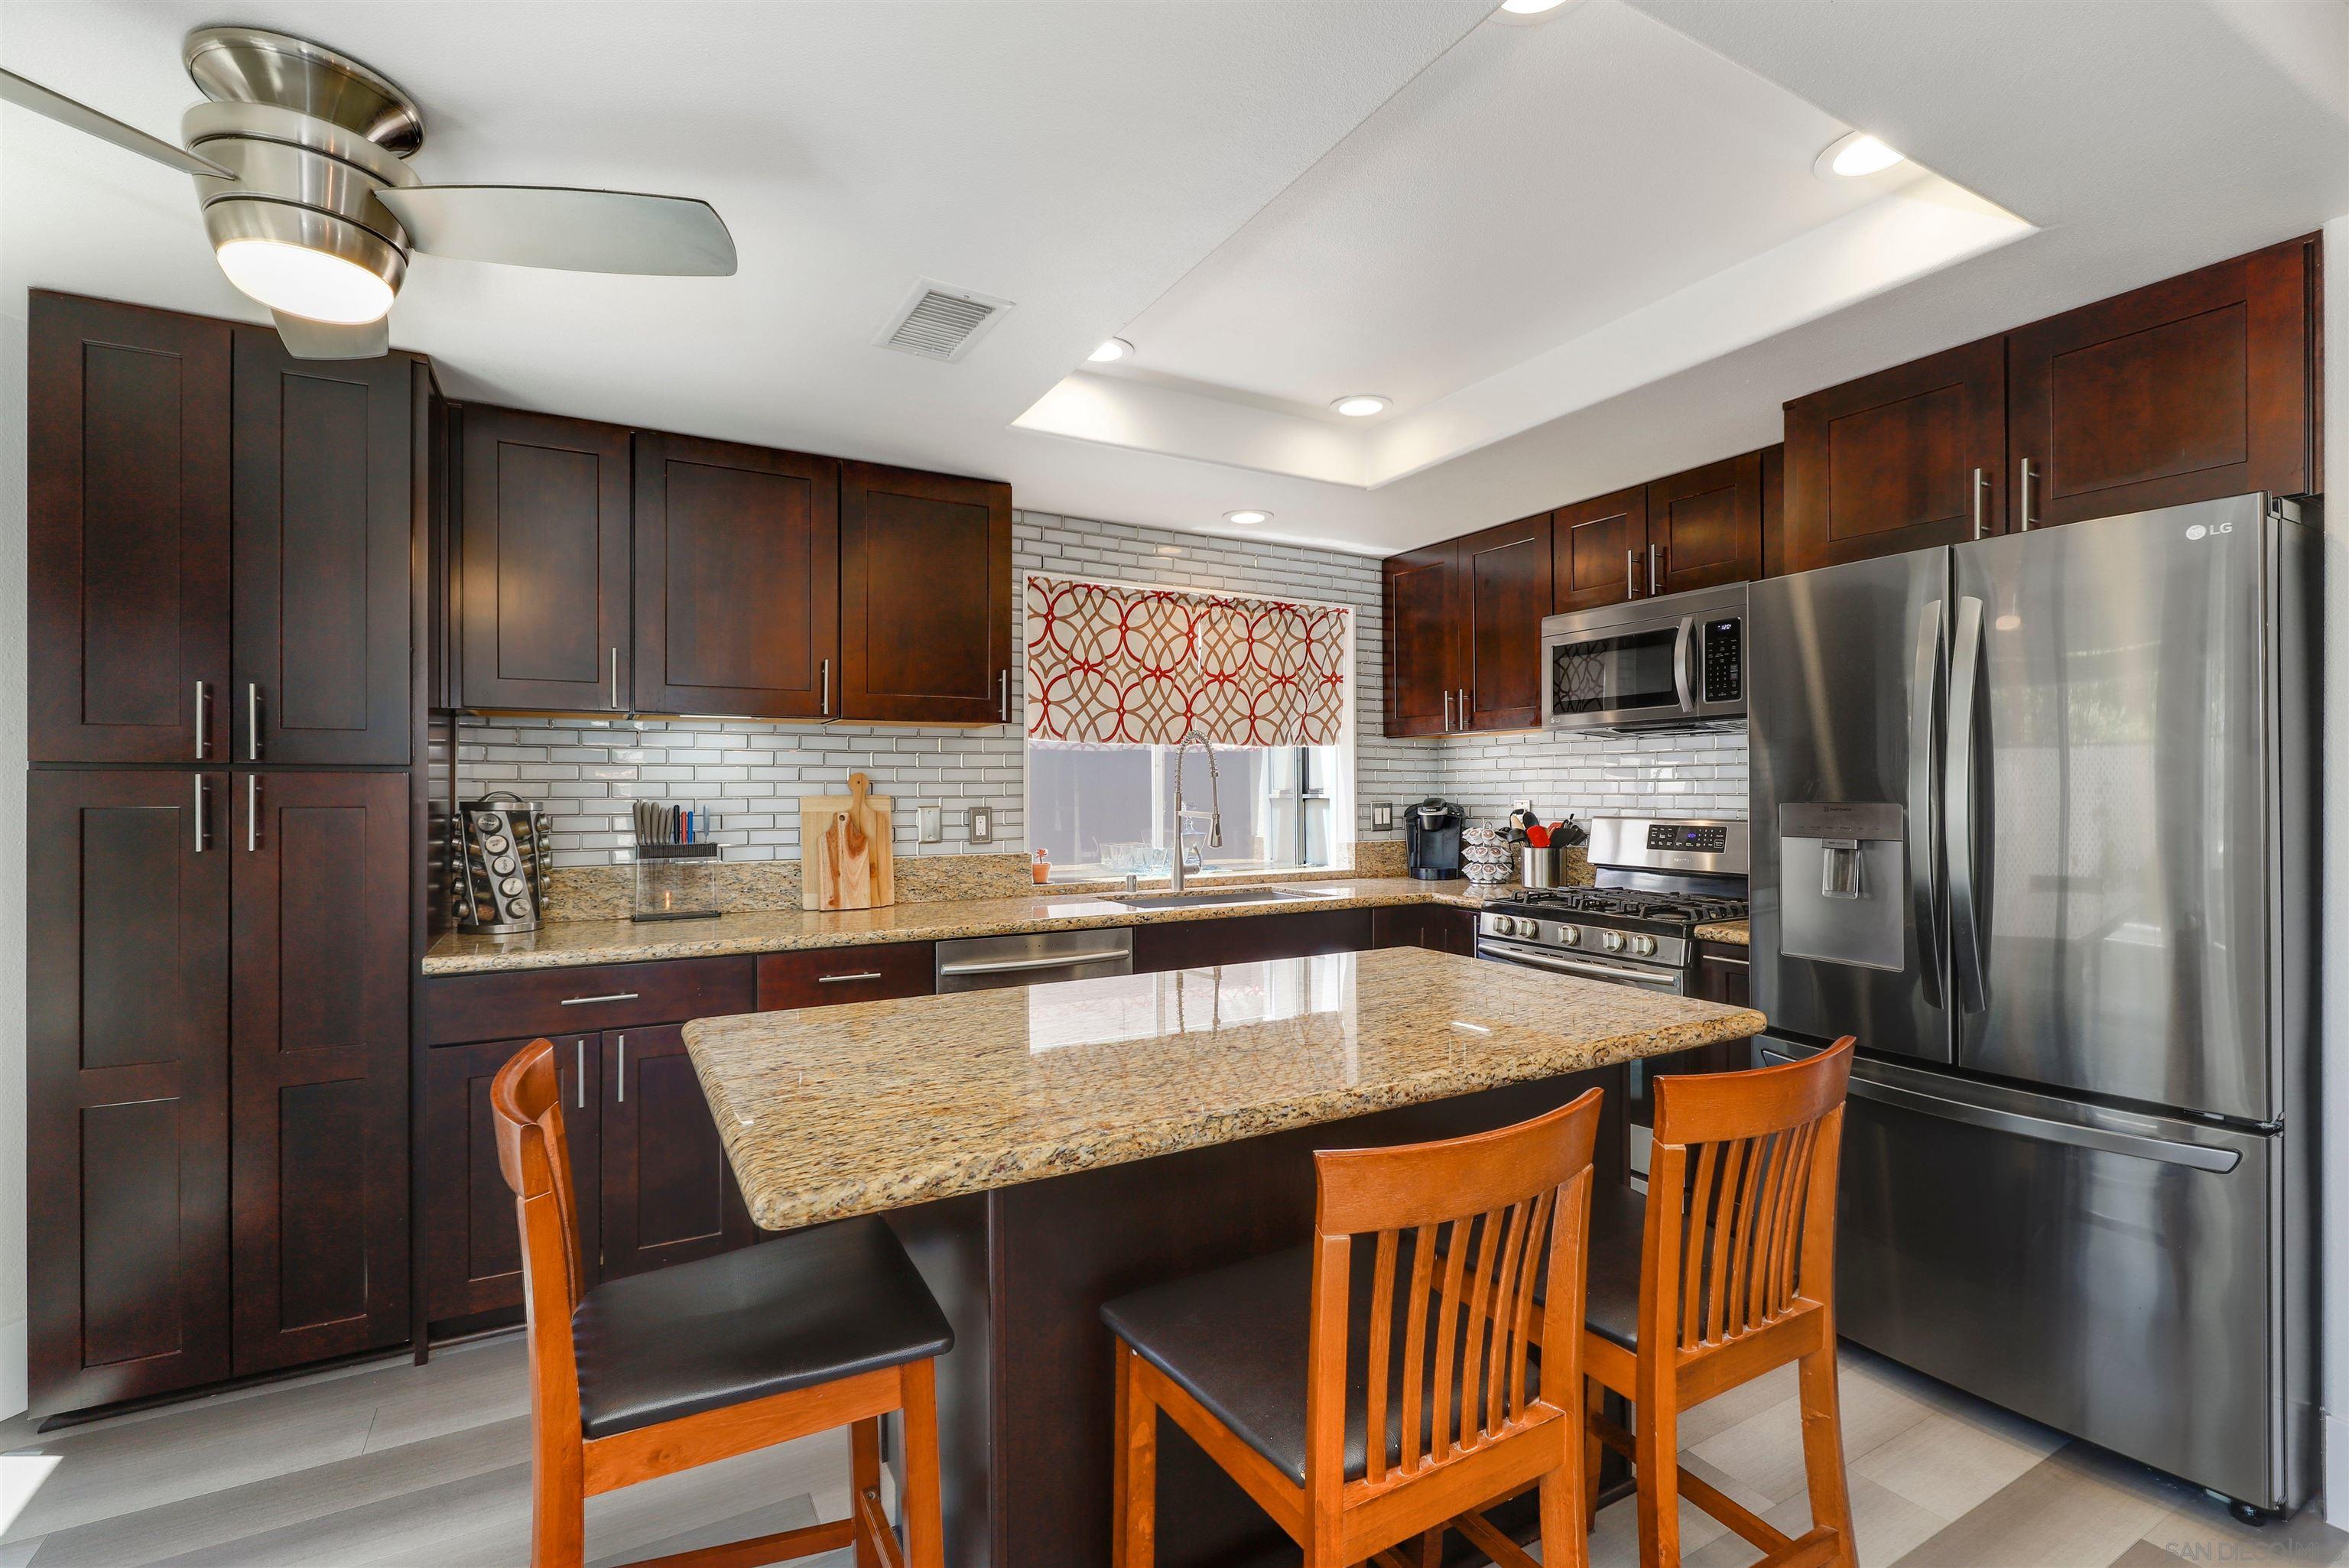 a kitchen with stainless steel appliances granite countertop a dining table chairs refrigerator and microwave